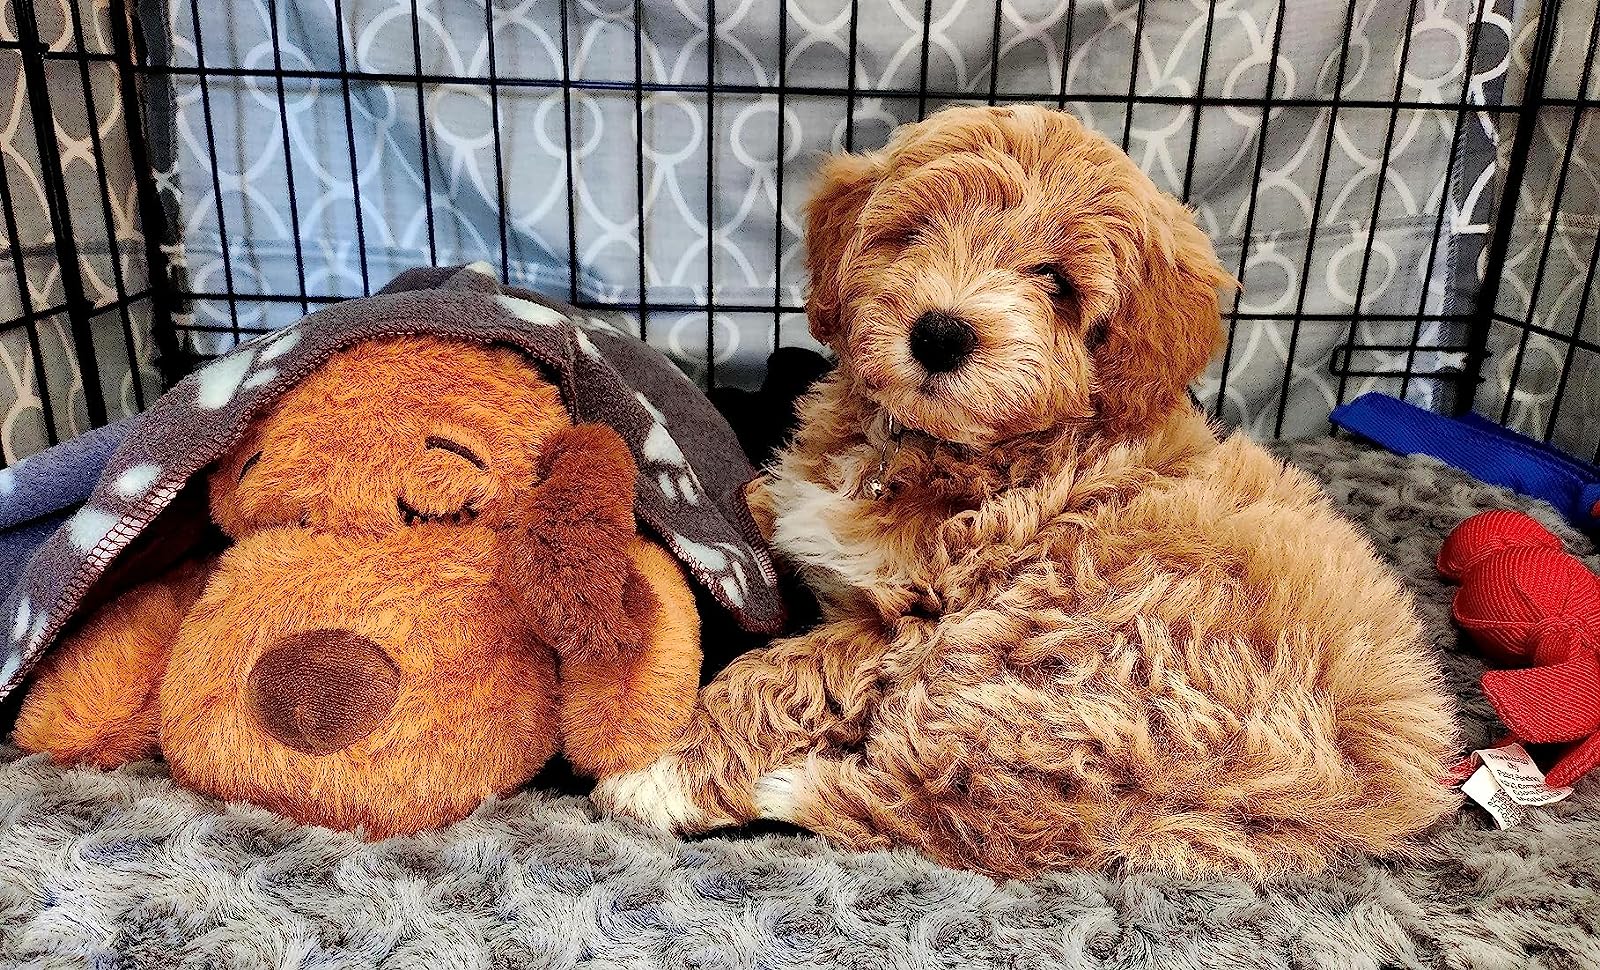 https://katycraftimage.s3.eu-west-2.amazonaws.com/pet-heartbeat-puppy-behavioral-training-dog-plush-pet-comfortable-snuggle-anxiety-relief-sleep-aid-doll-durable-drop-dc05-02378807-343906-review-8Y91RZWR9W.jpg